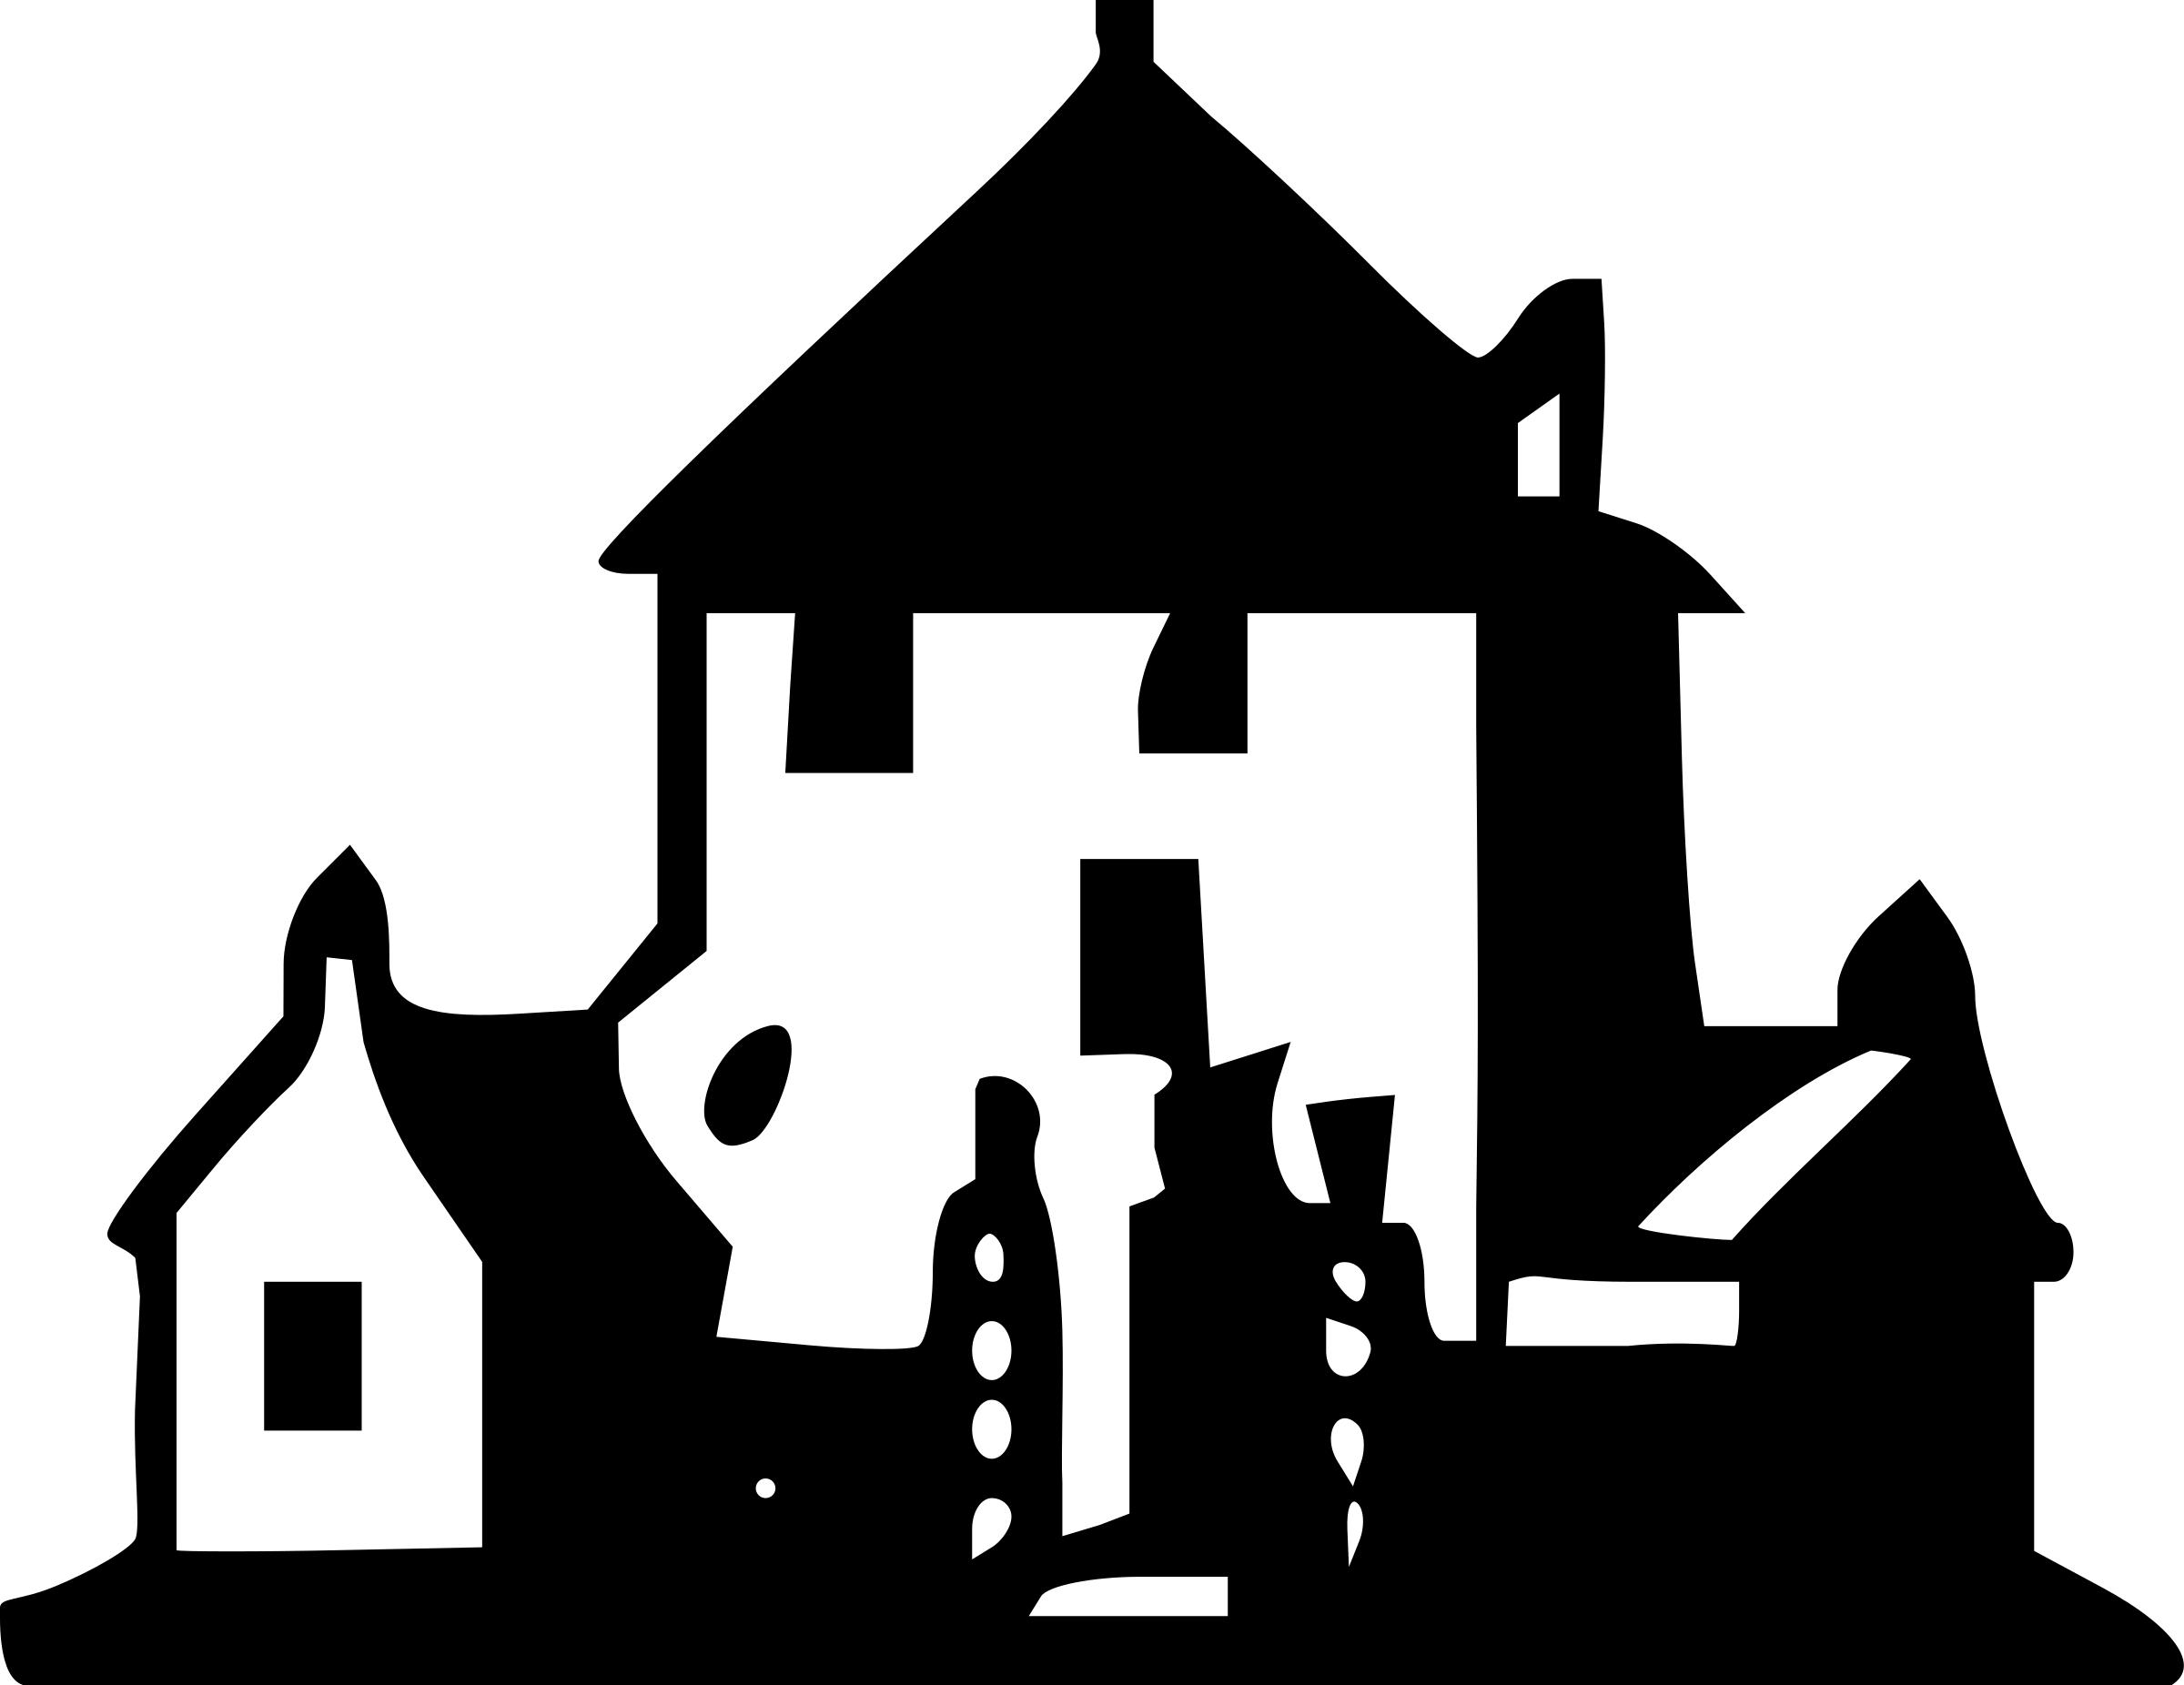 Haunted House icons